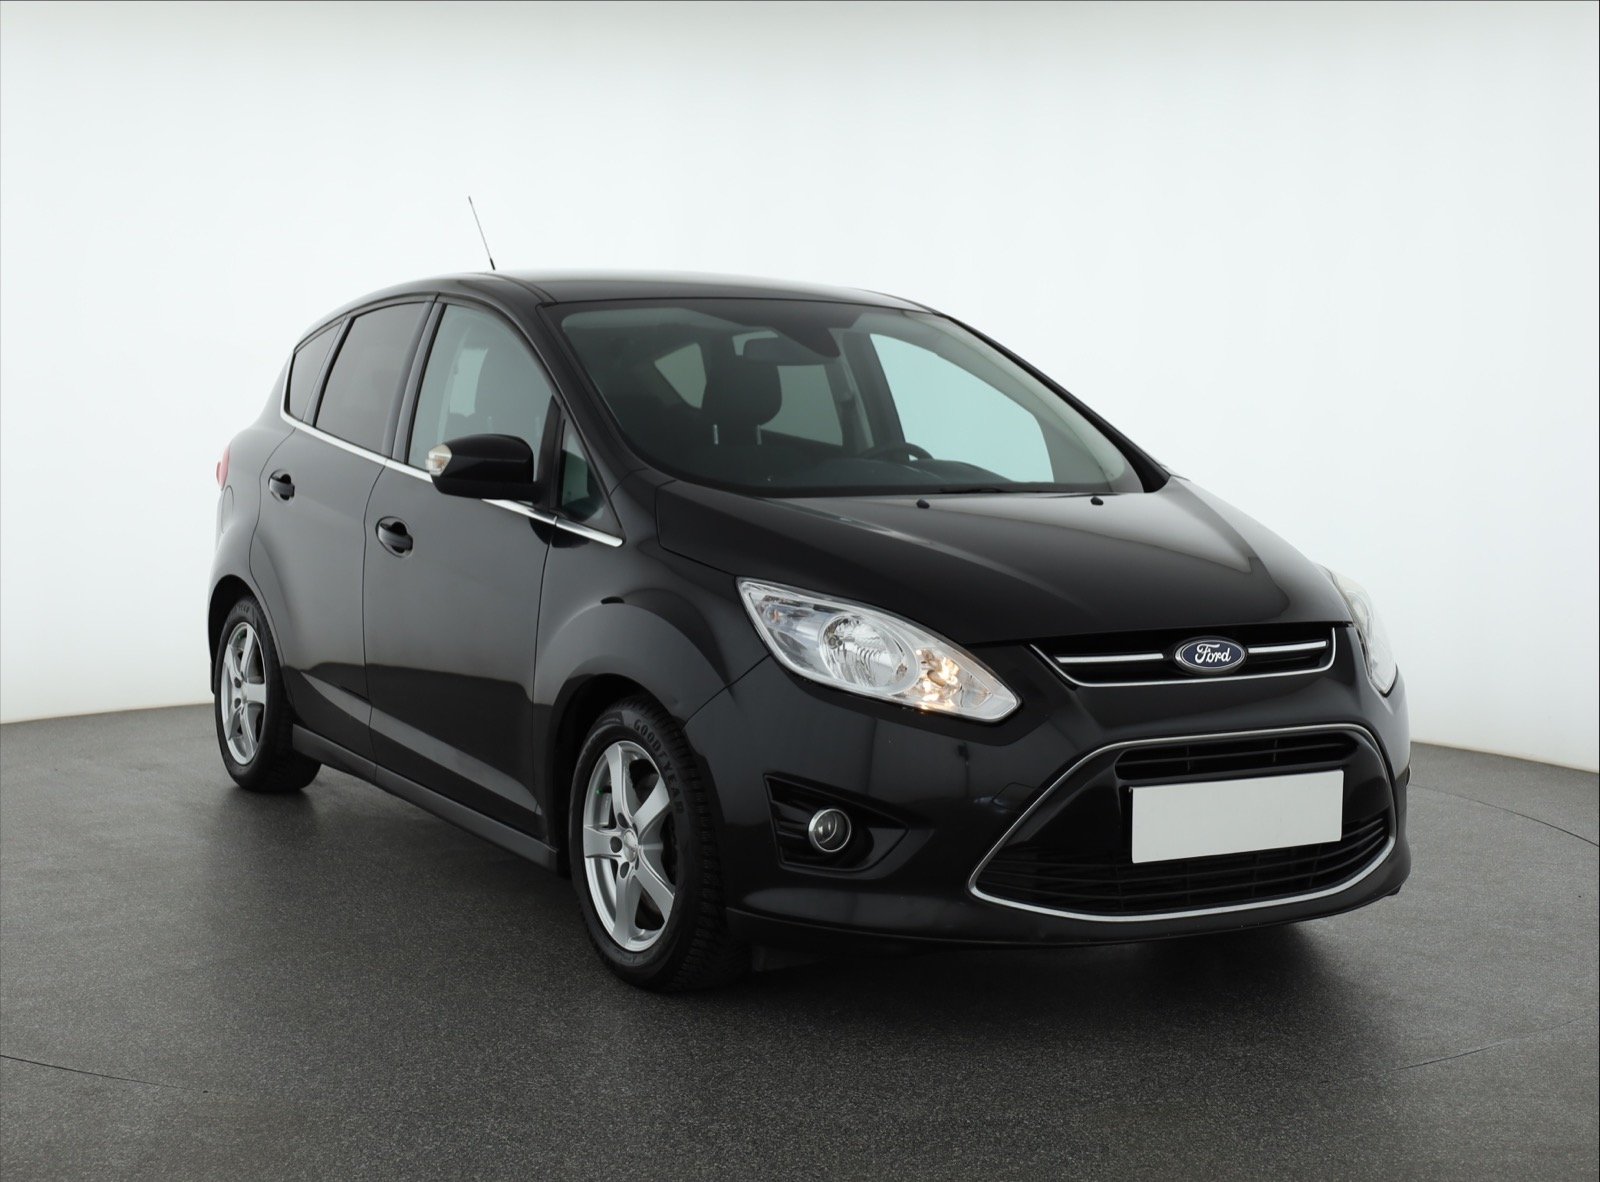 Ford C-Max 1.6 EcoBoost SUV 2013 - 1